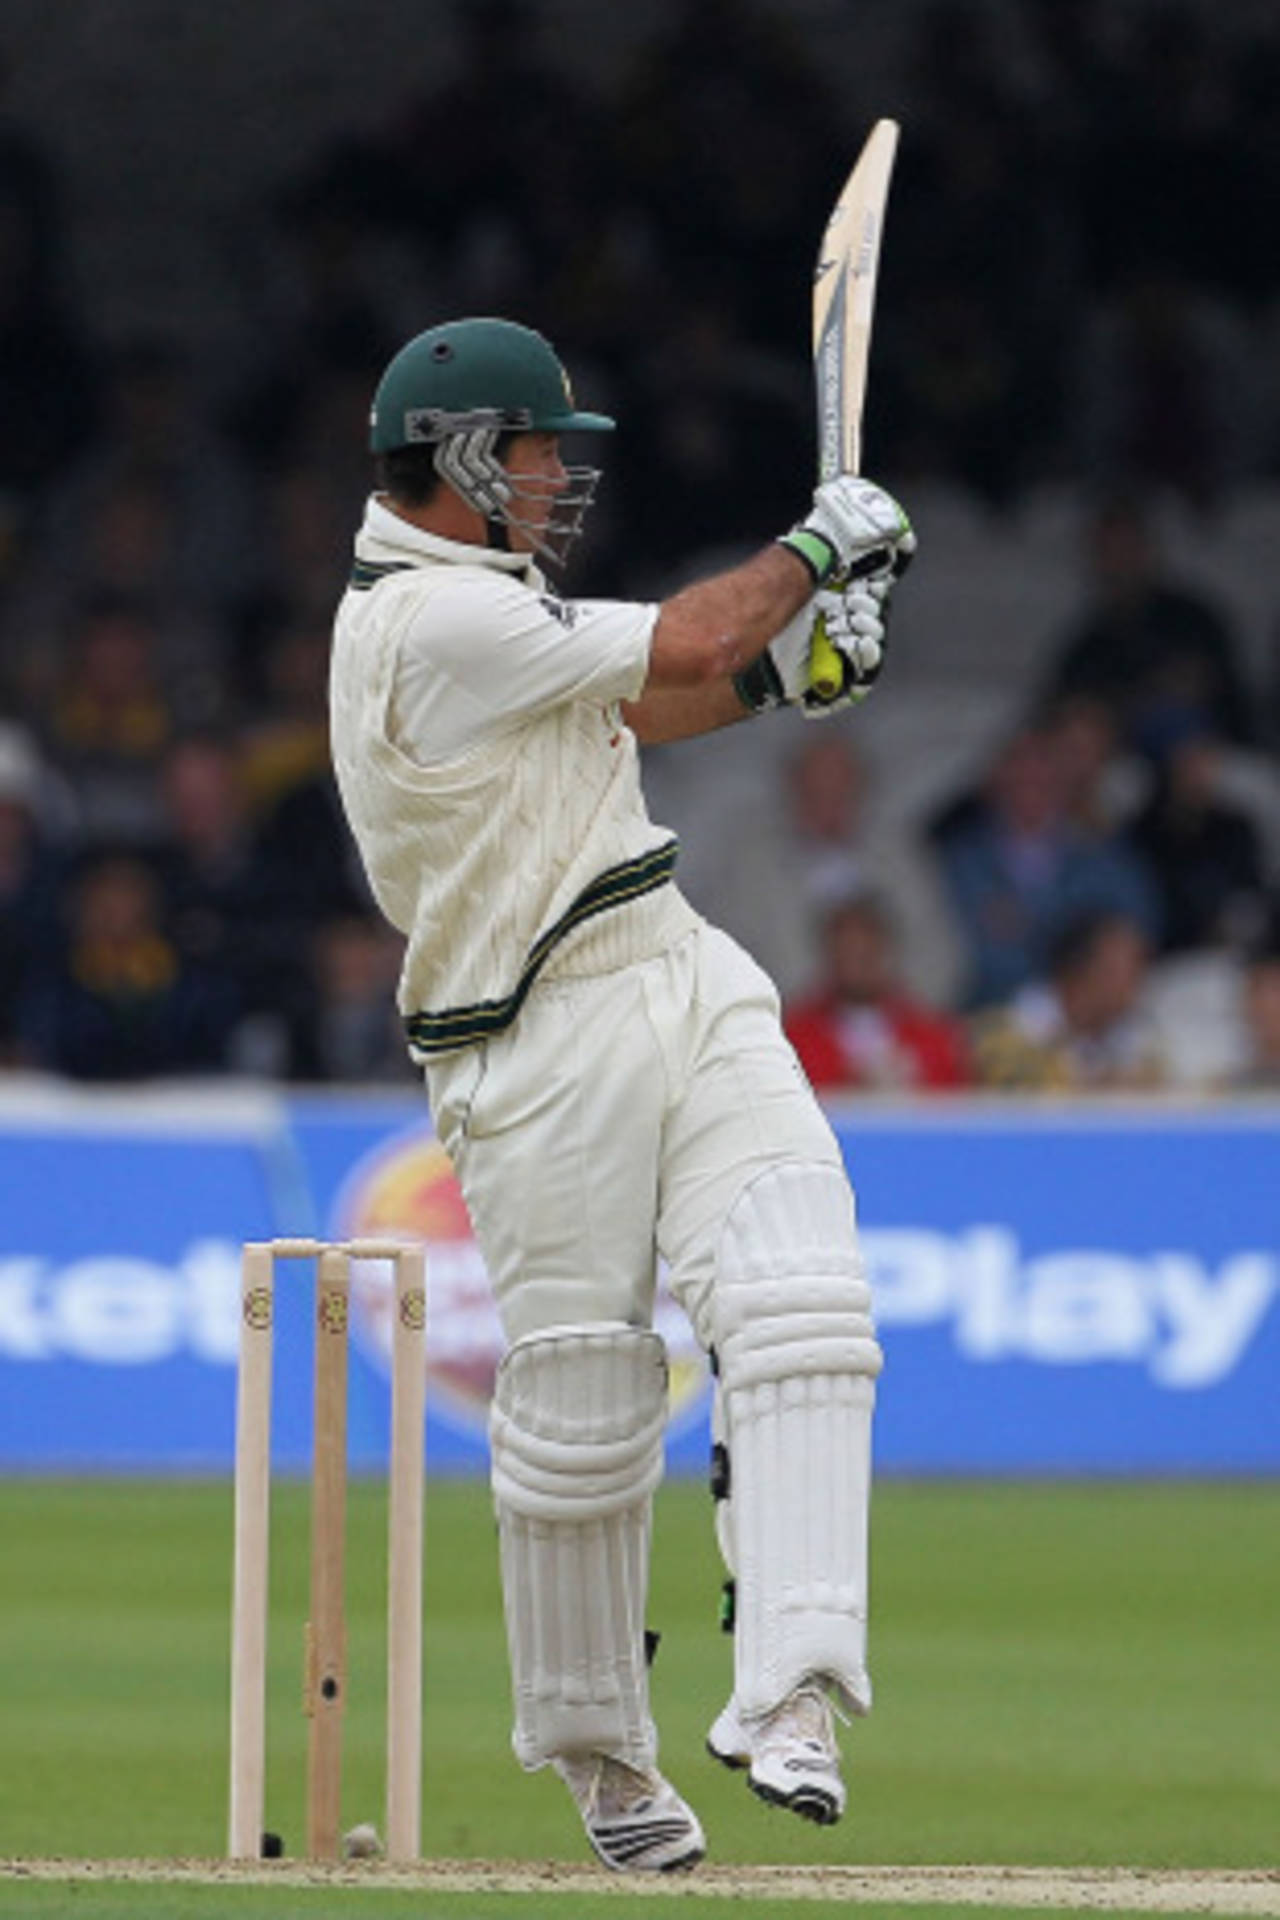 Ricky Ponting battled hard to ensure Australia went to lunch with only one wicket down, Pakistan v Australia, 1st Test, Lord's, July 13, 2010